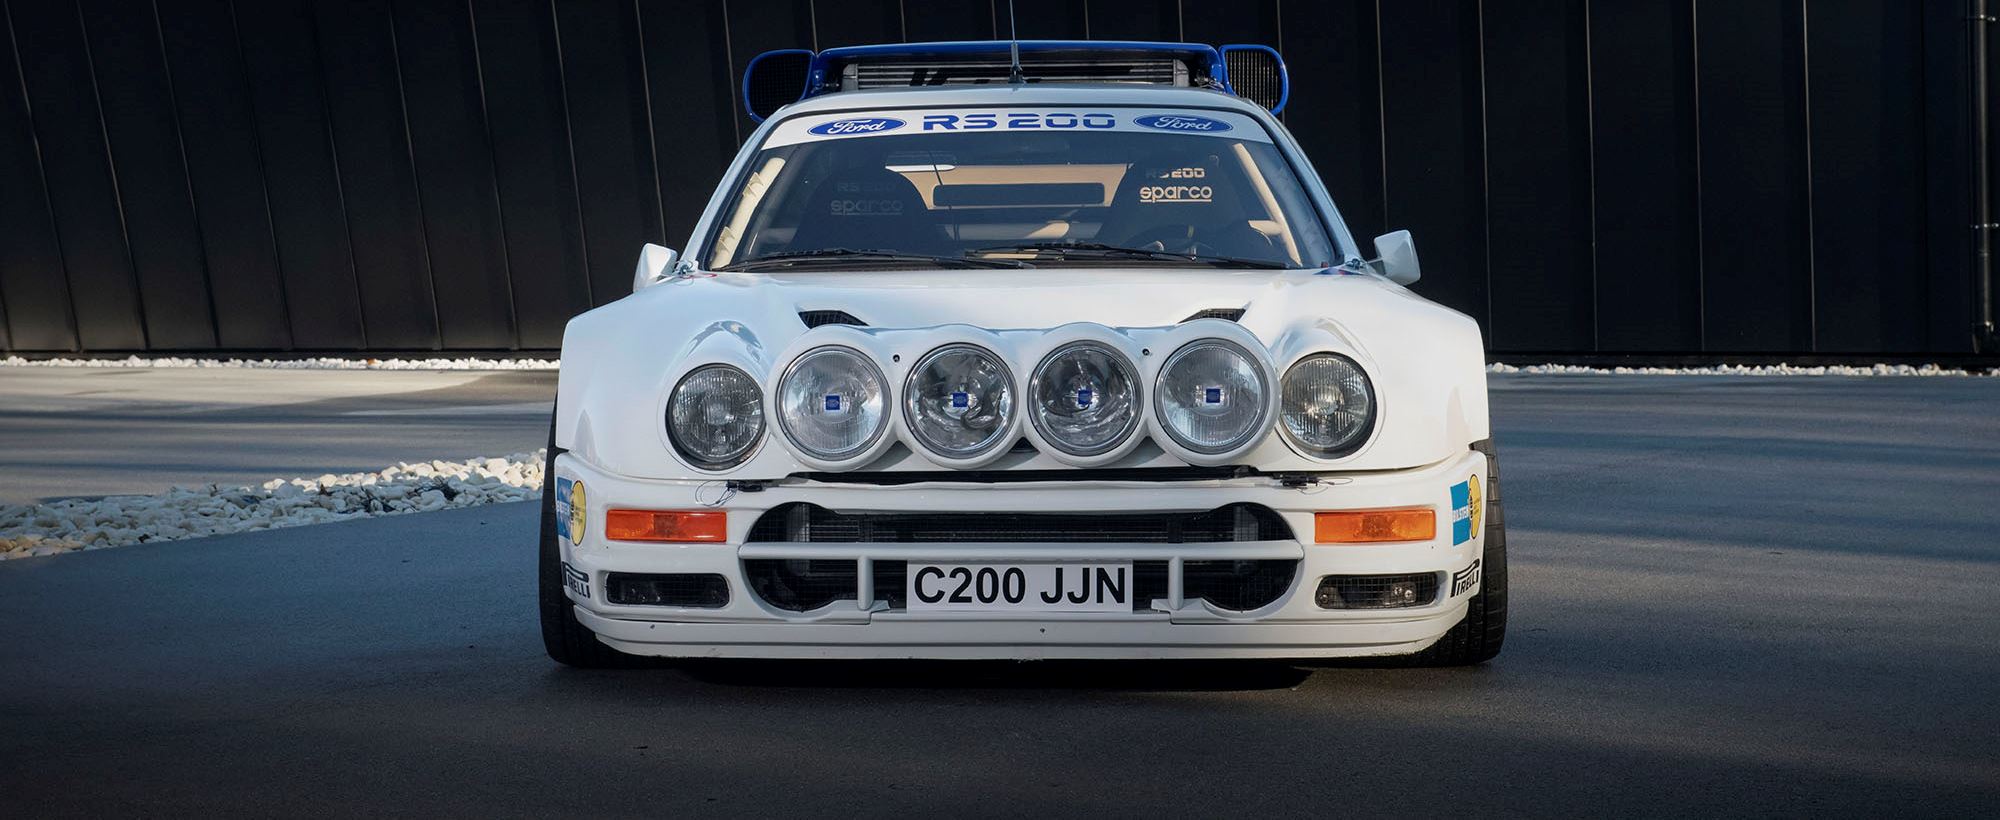 Ford RS 200 015.jpg